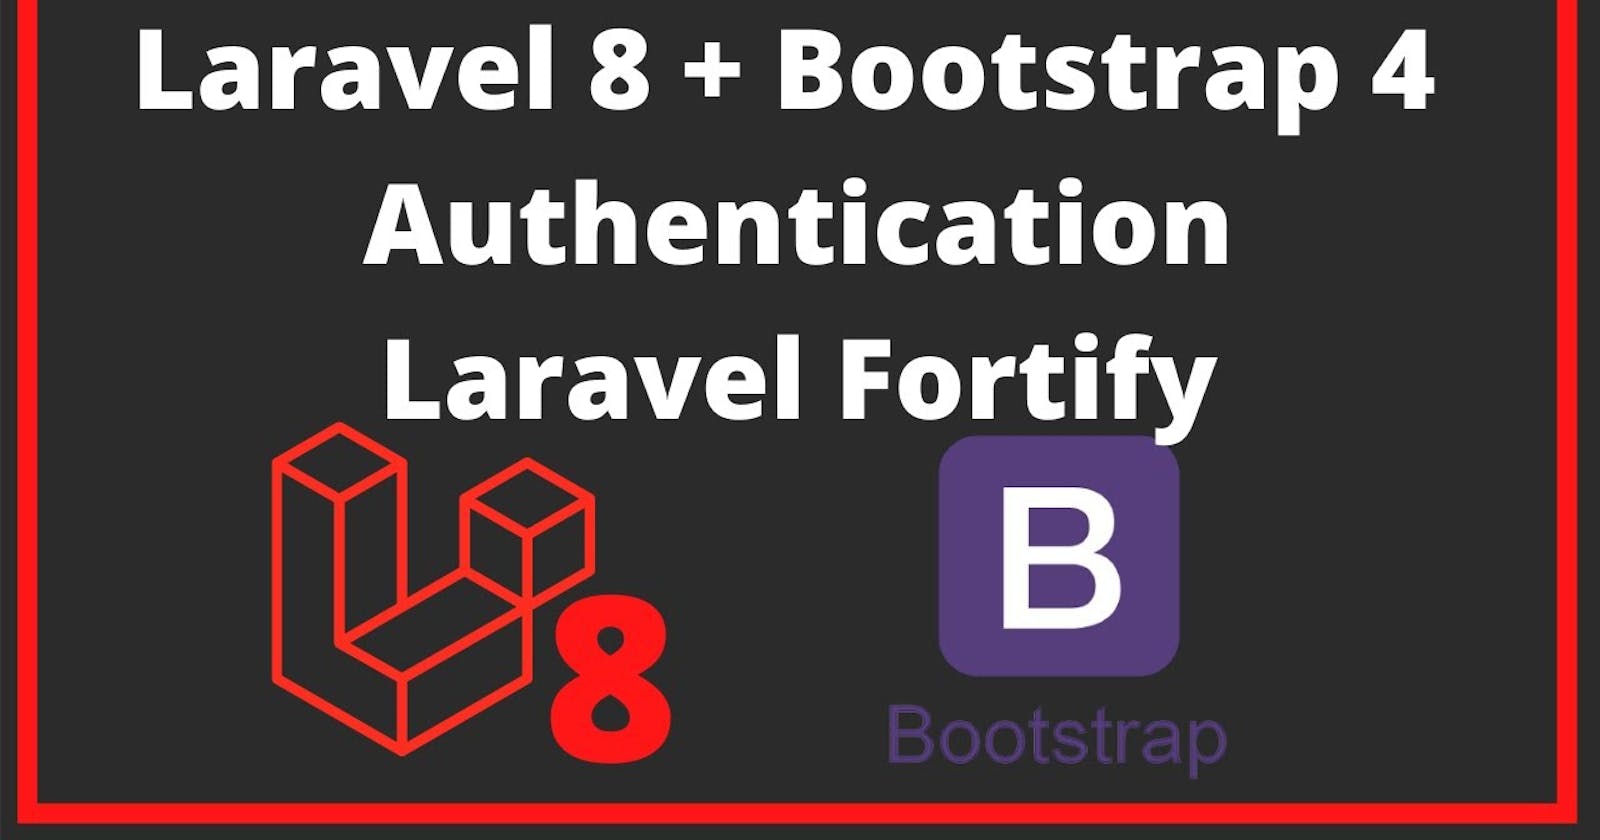 Complete Laravel 8 Authentication Using Laravel Fortify and Bootstrap 4 - Part 1